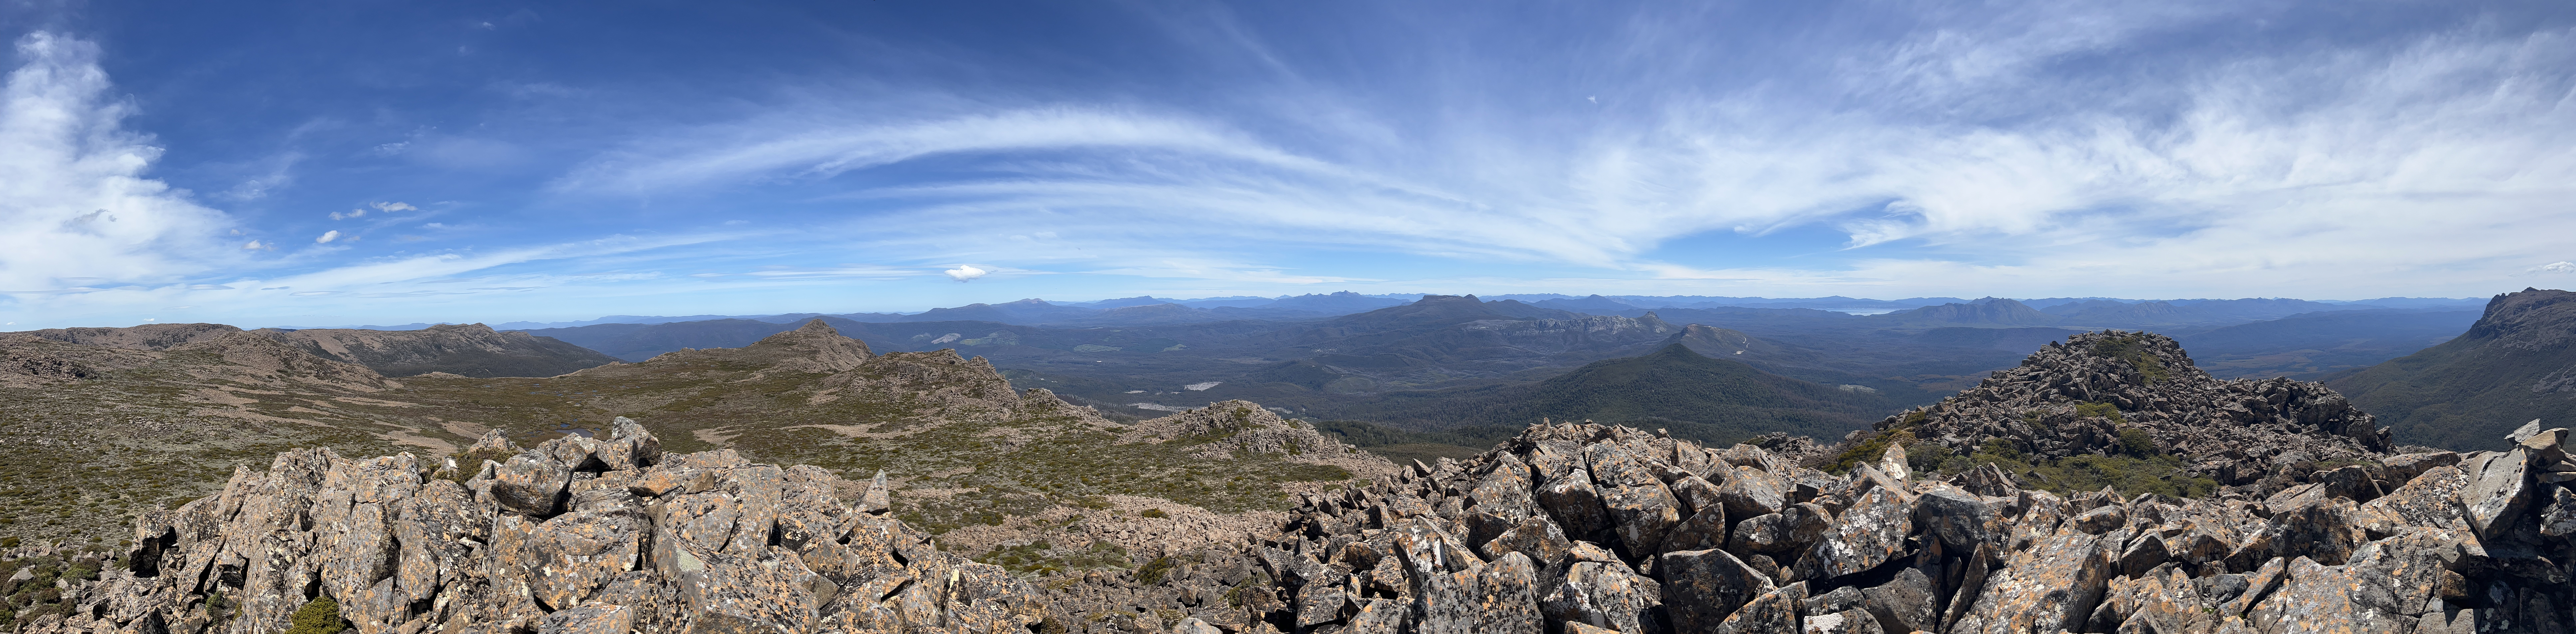 Panorama from the top of Florentine Peak